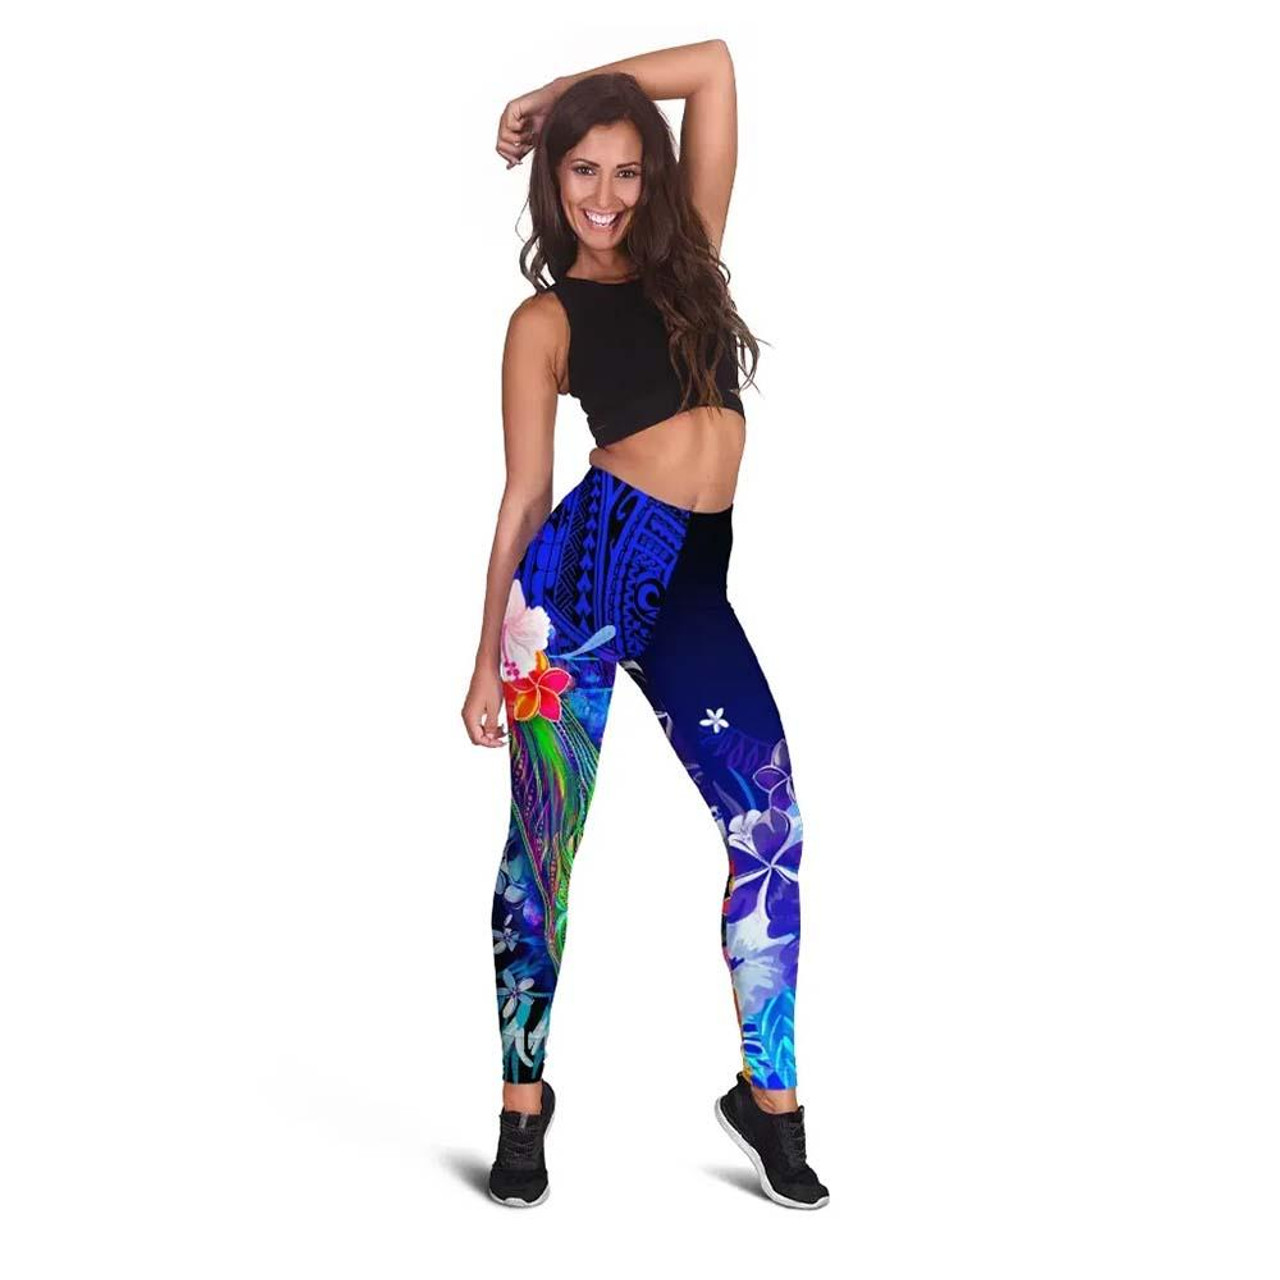 https://cdn11.bigcommerce.com/s-q6xsfp1zsy/images/stencil/1280x1280/products/103327/400576/guam-legging-humpback-whale-with-tropical-flowers-blue-1__08520.1634698713.jpg?c=1